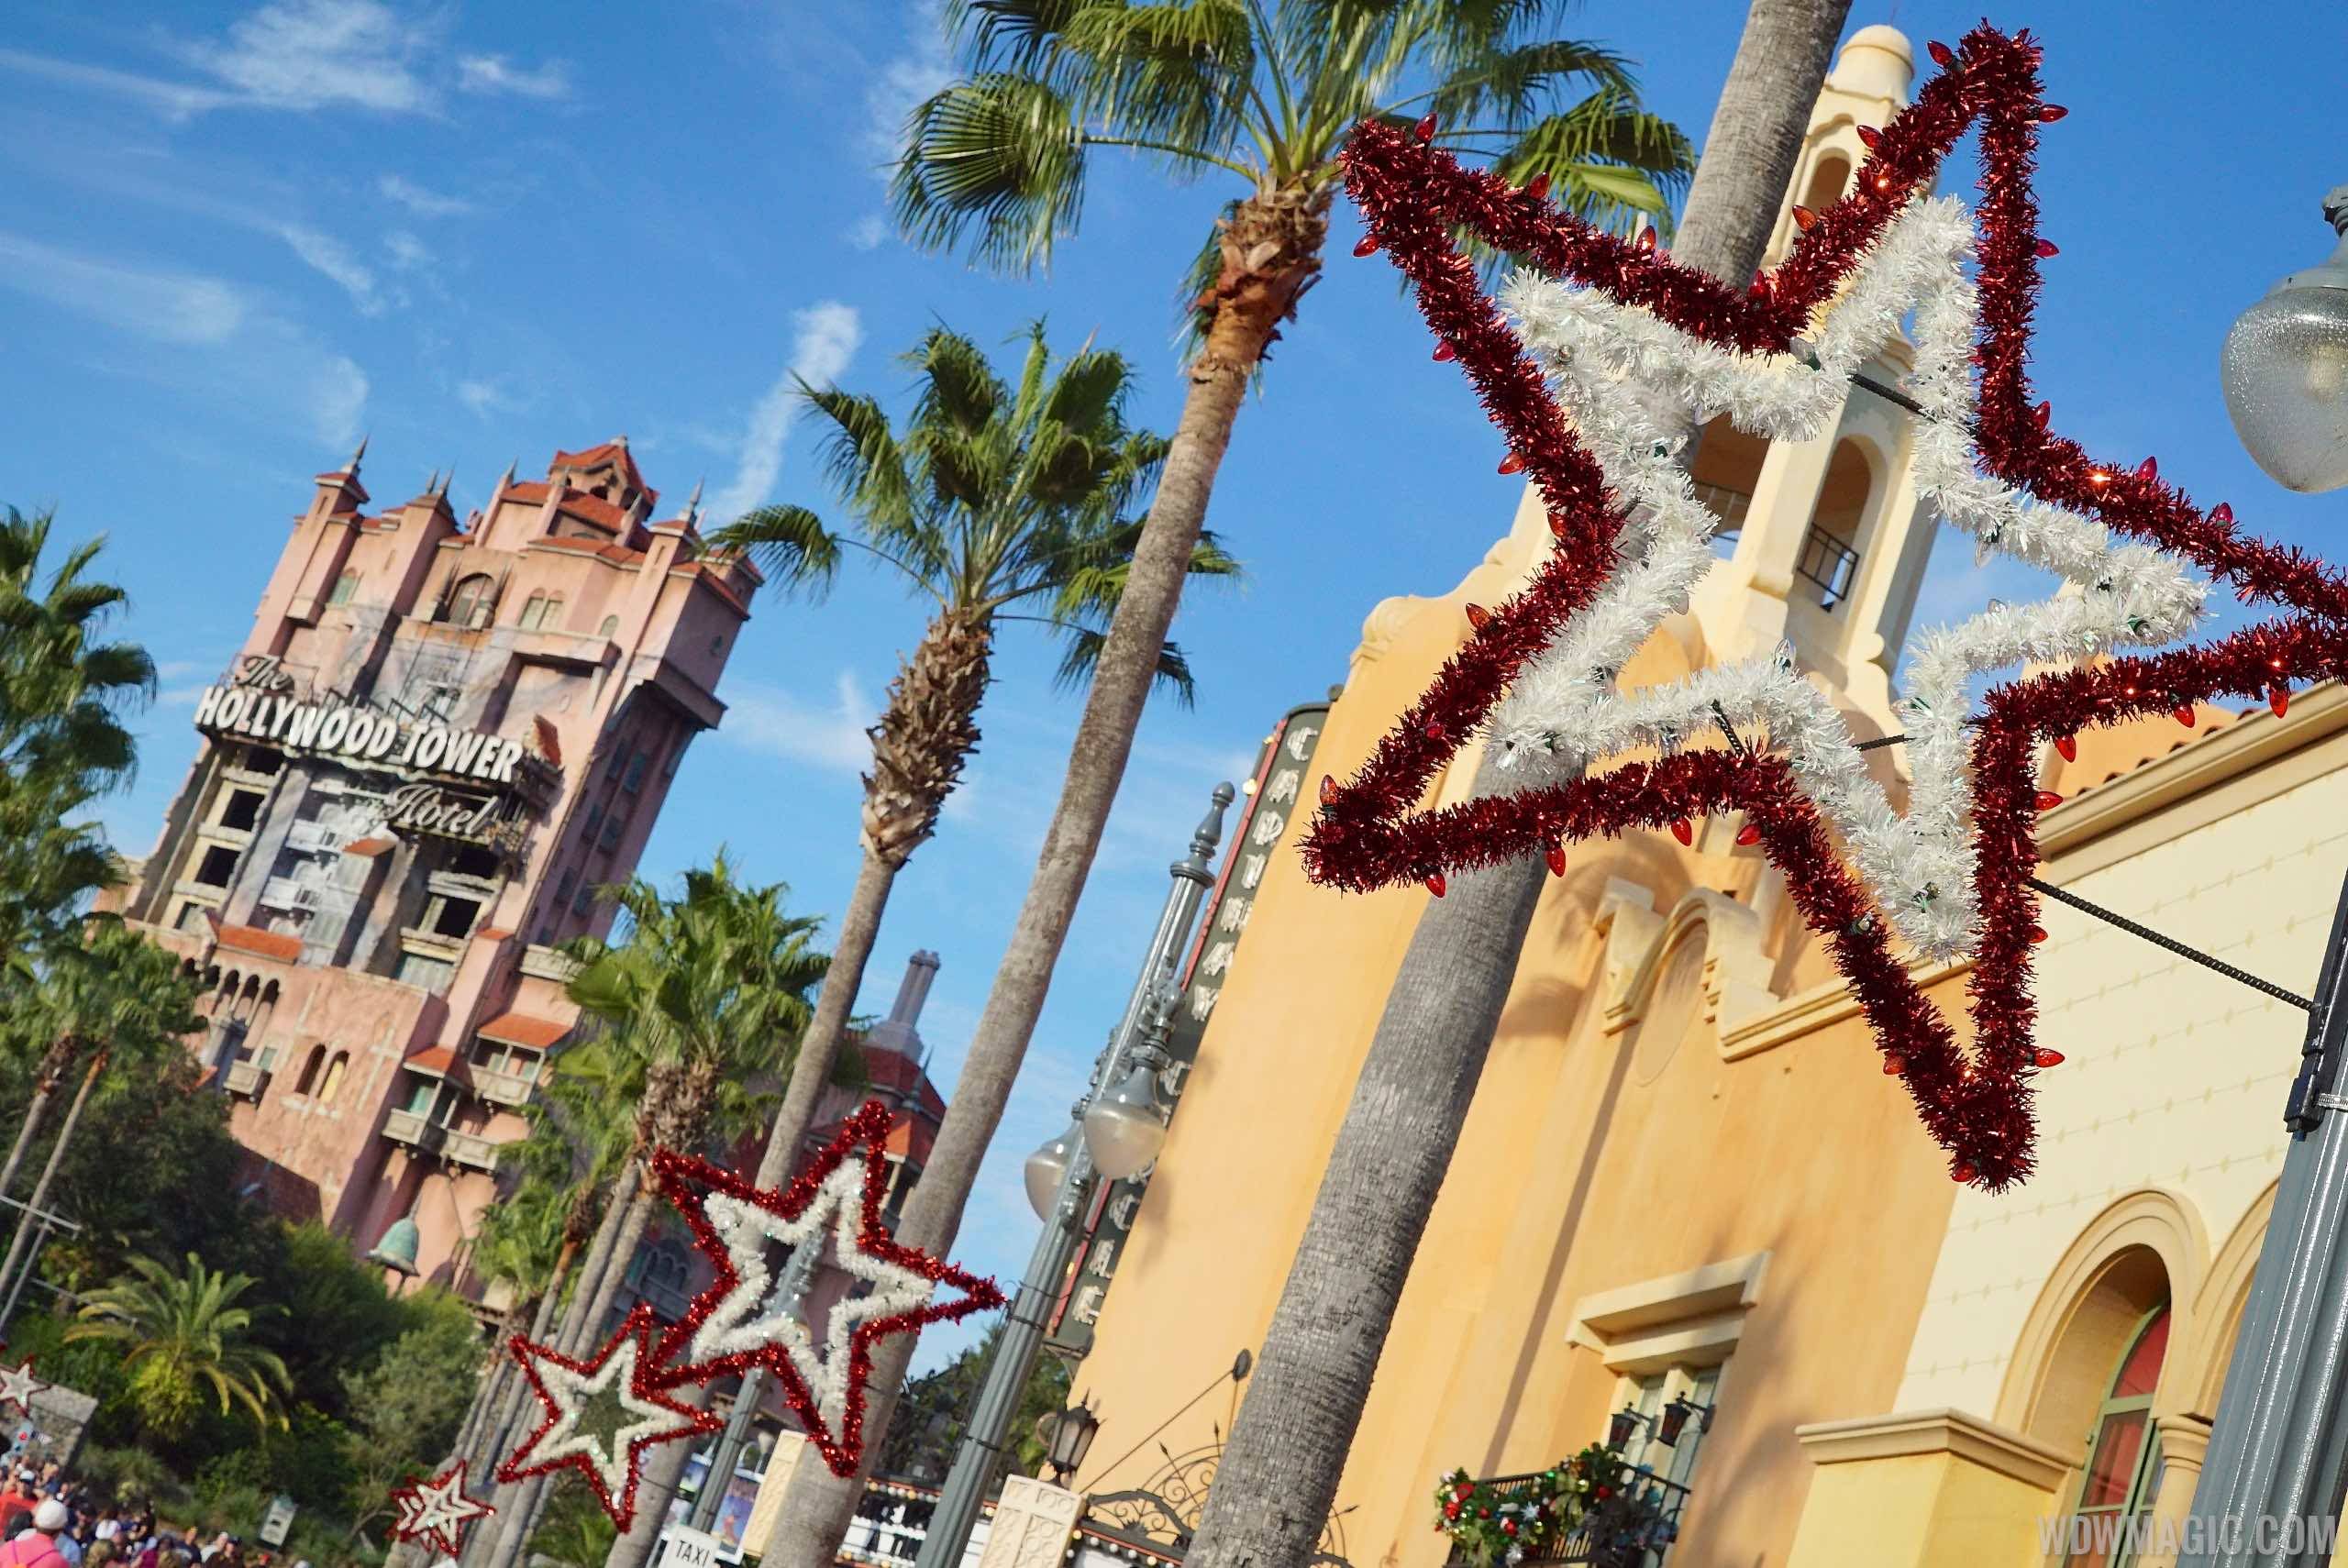 Disney's Hollywood Studios is gearing up for an exclusive Holiday Season ticketed event